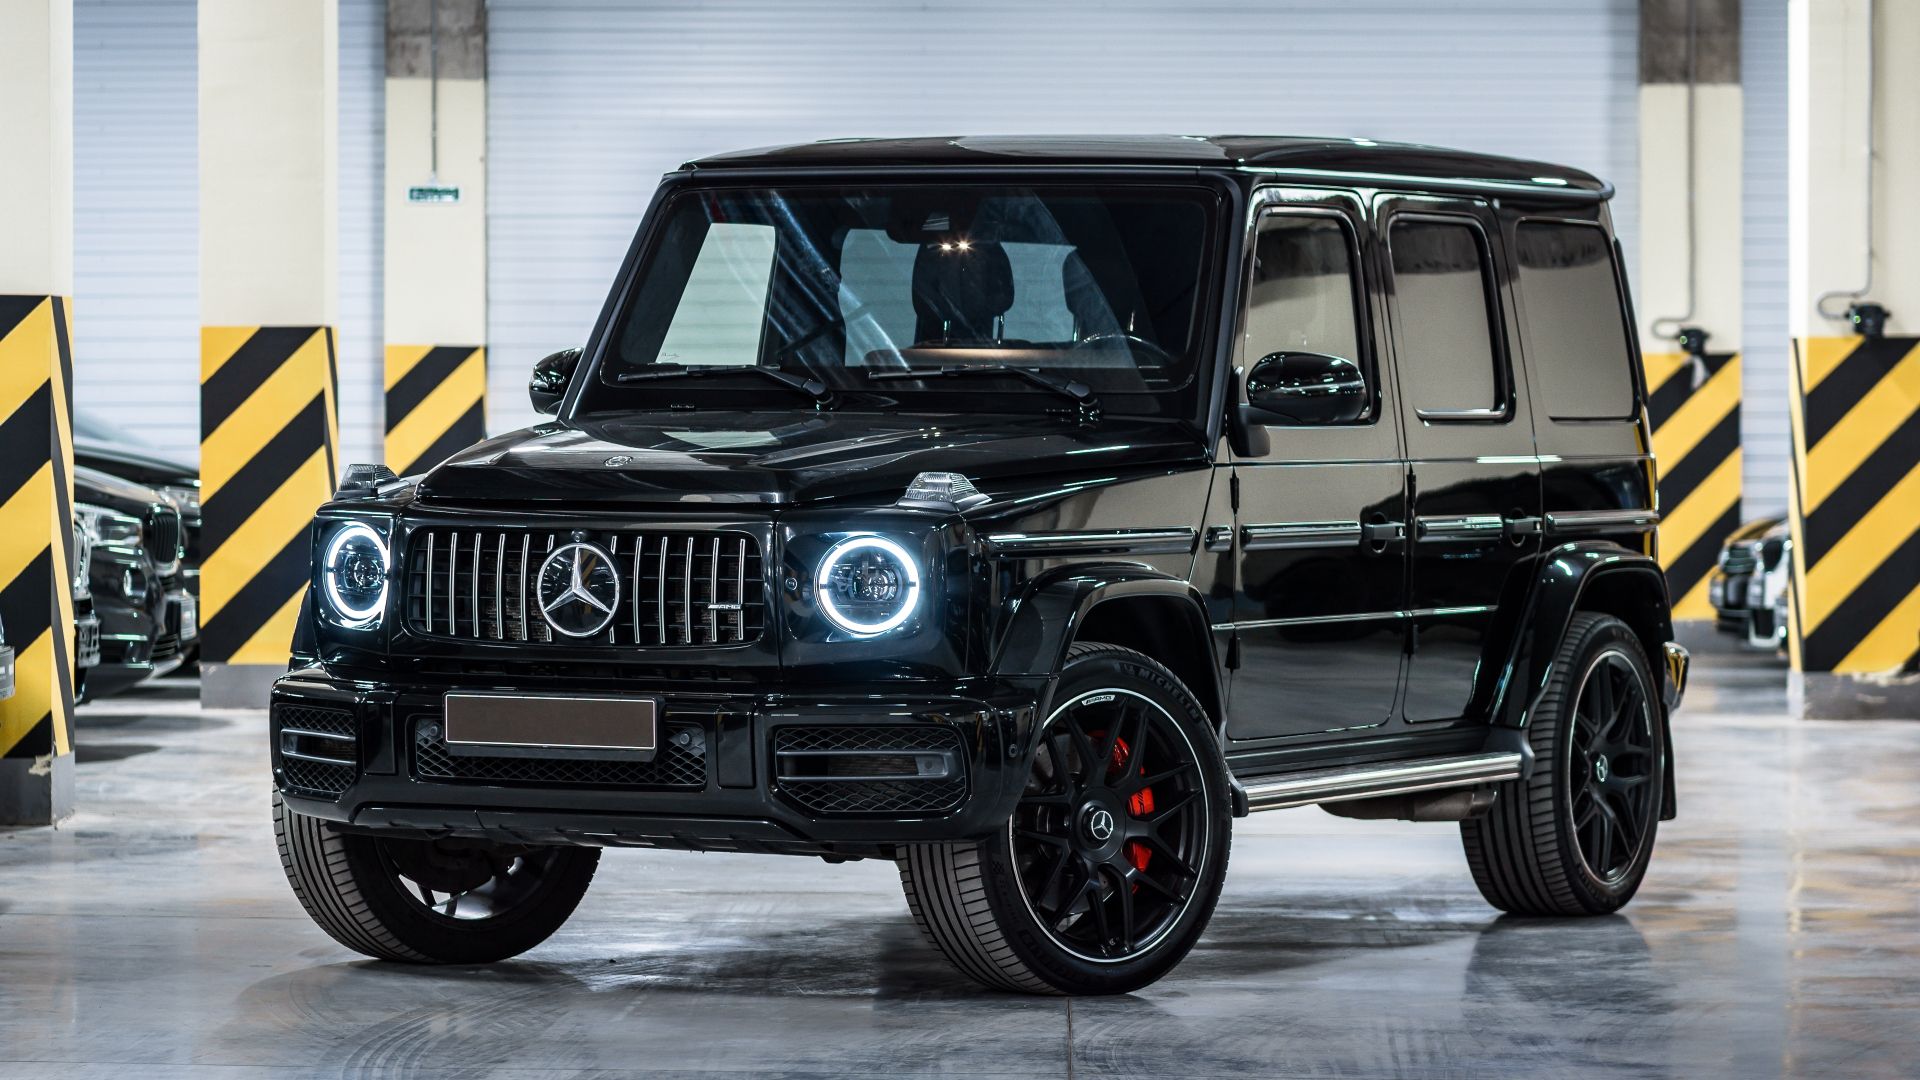 10 Fun Facts You Need To Know About The Mercedes G-Wagen